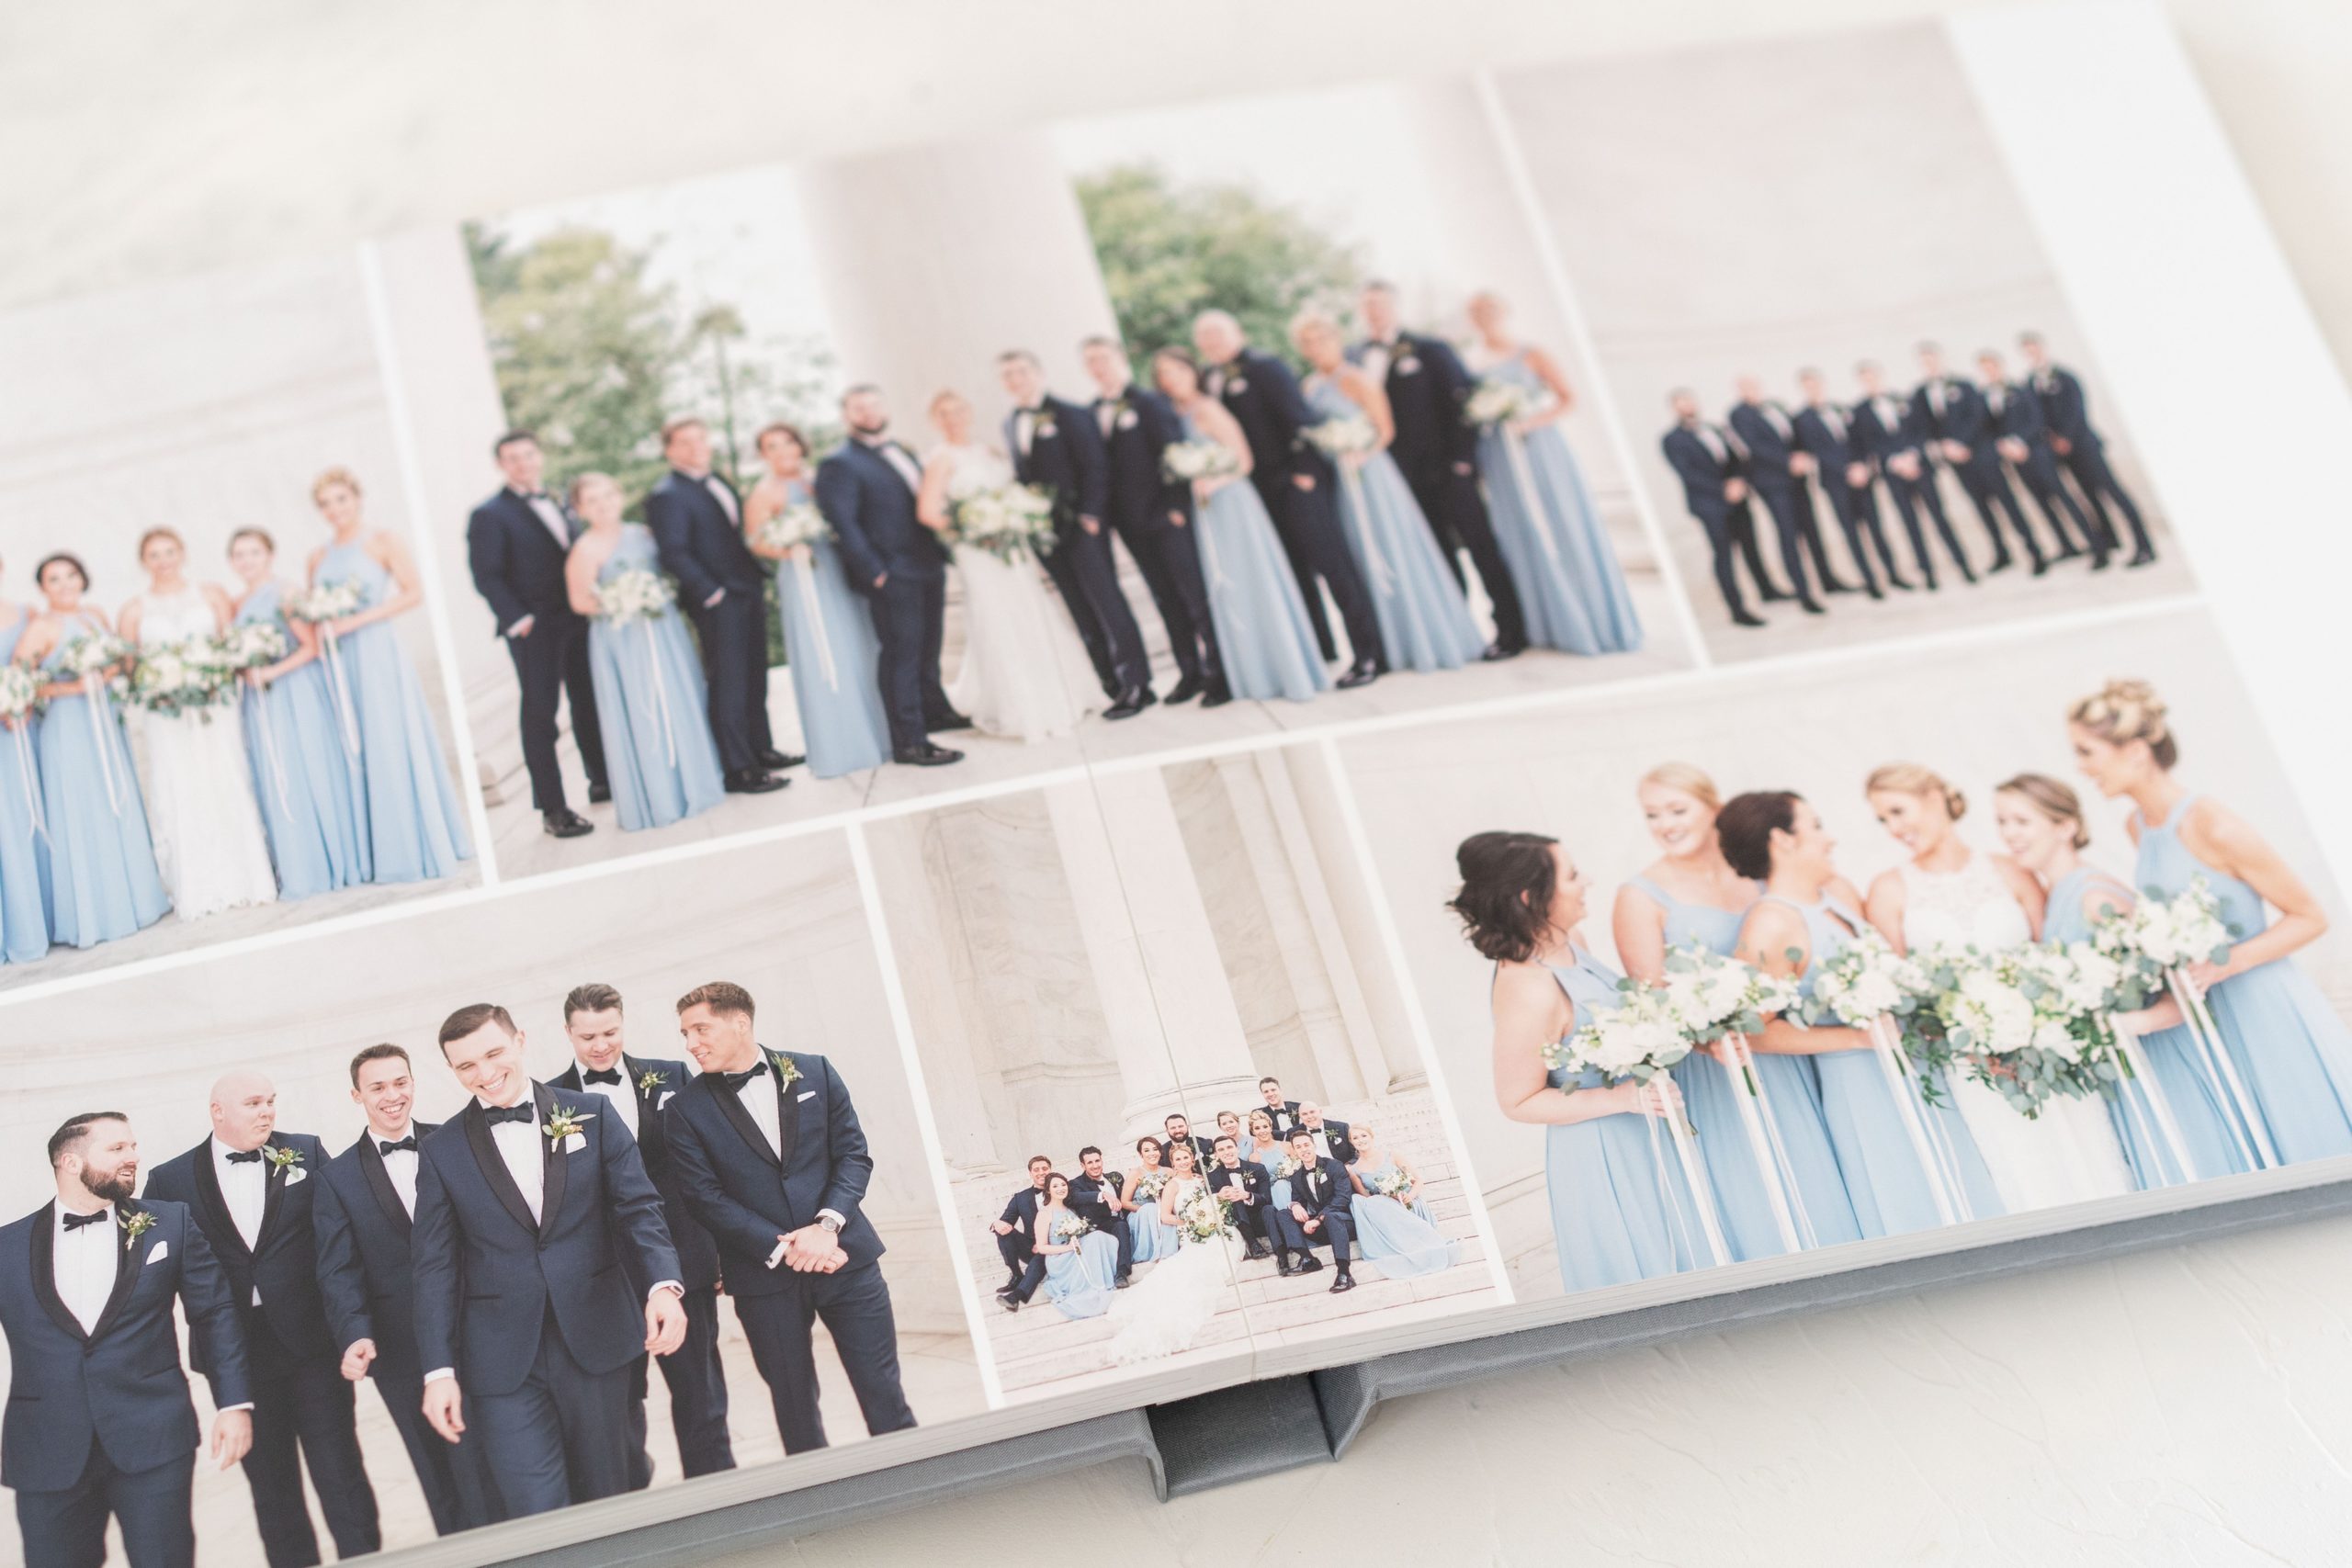 A silk heirloom wedding album with images from Washington DC's Mayflower Hotel and iconic Jefferson Memorial.